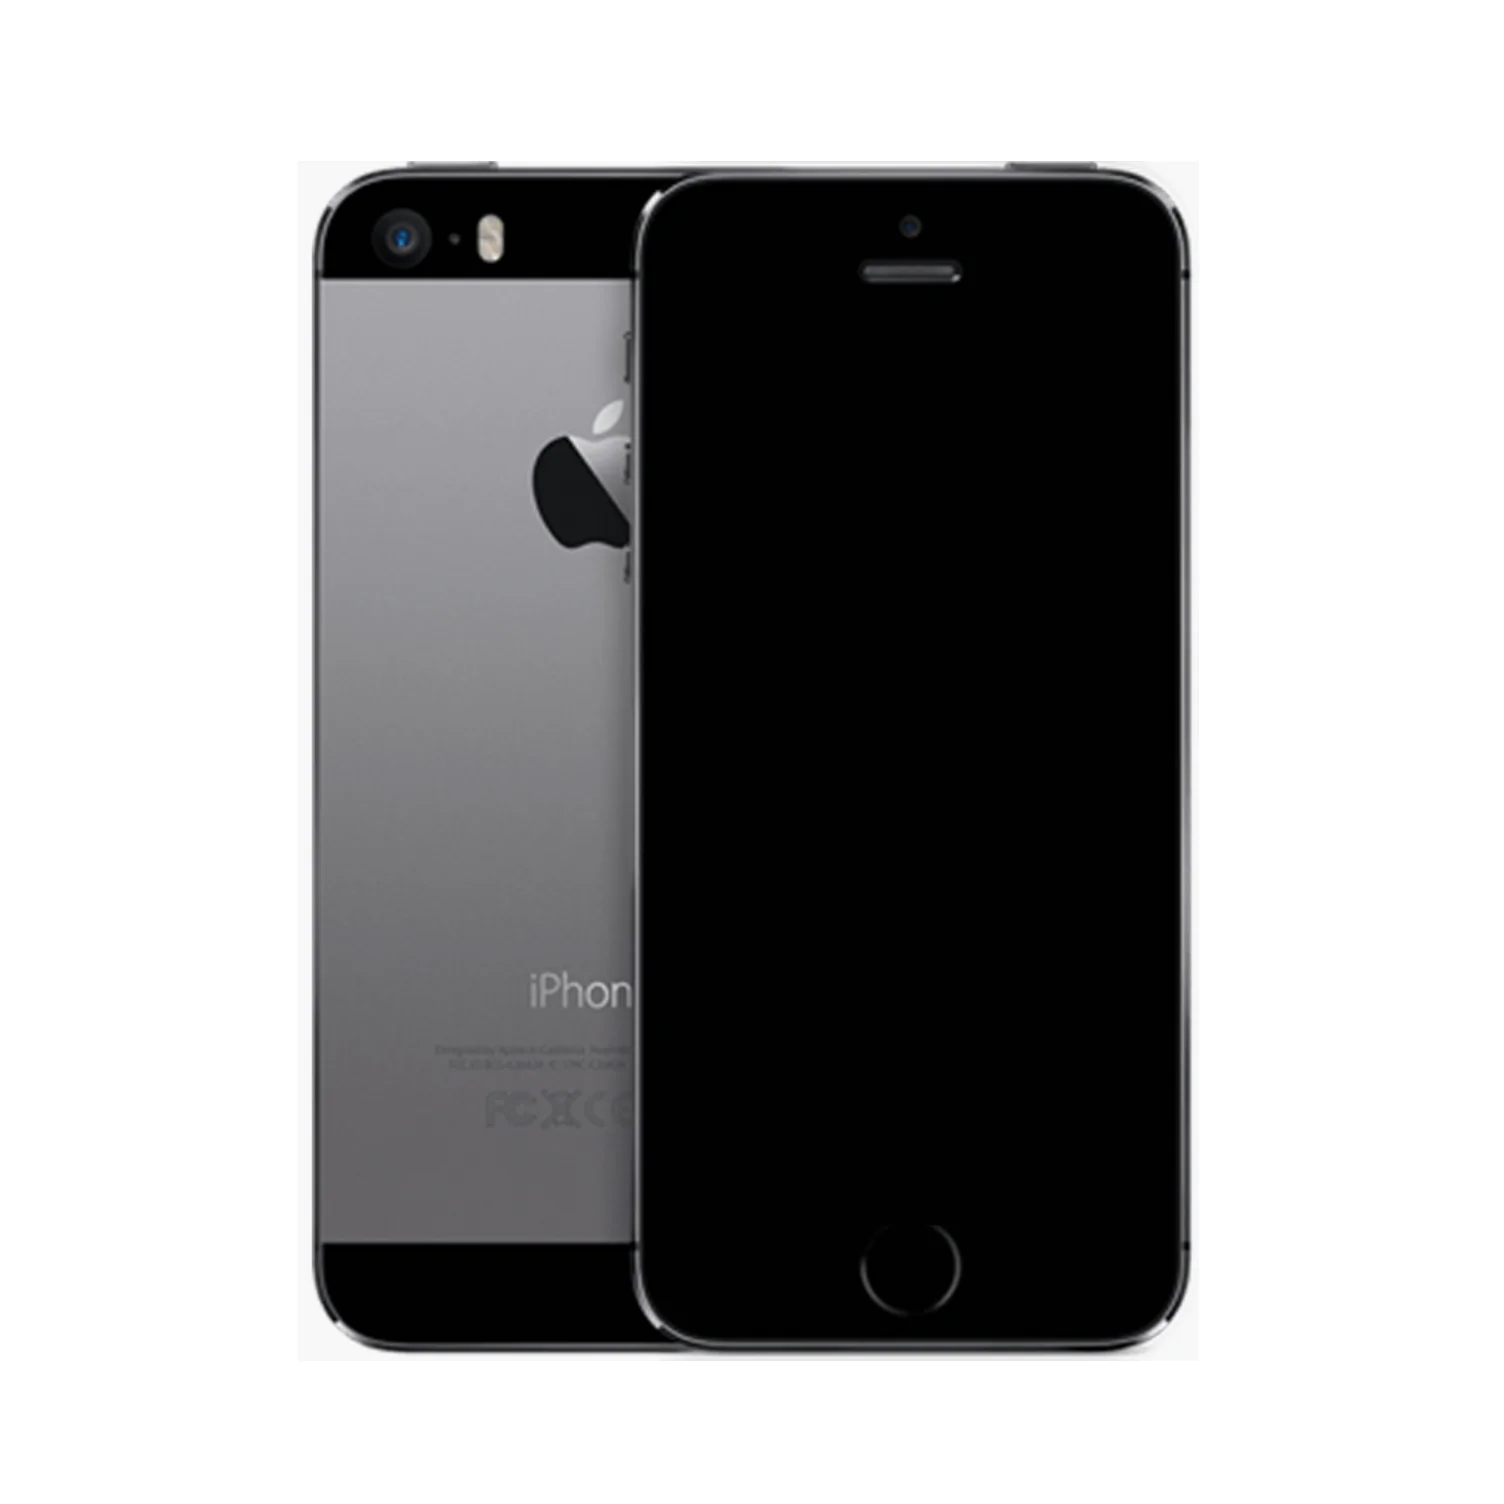 Smartphone Apple iPhone 5S 32GB Grade A+ (Avec Accessoires) Gris Sideral